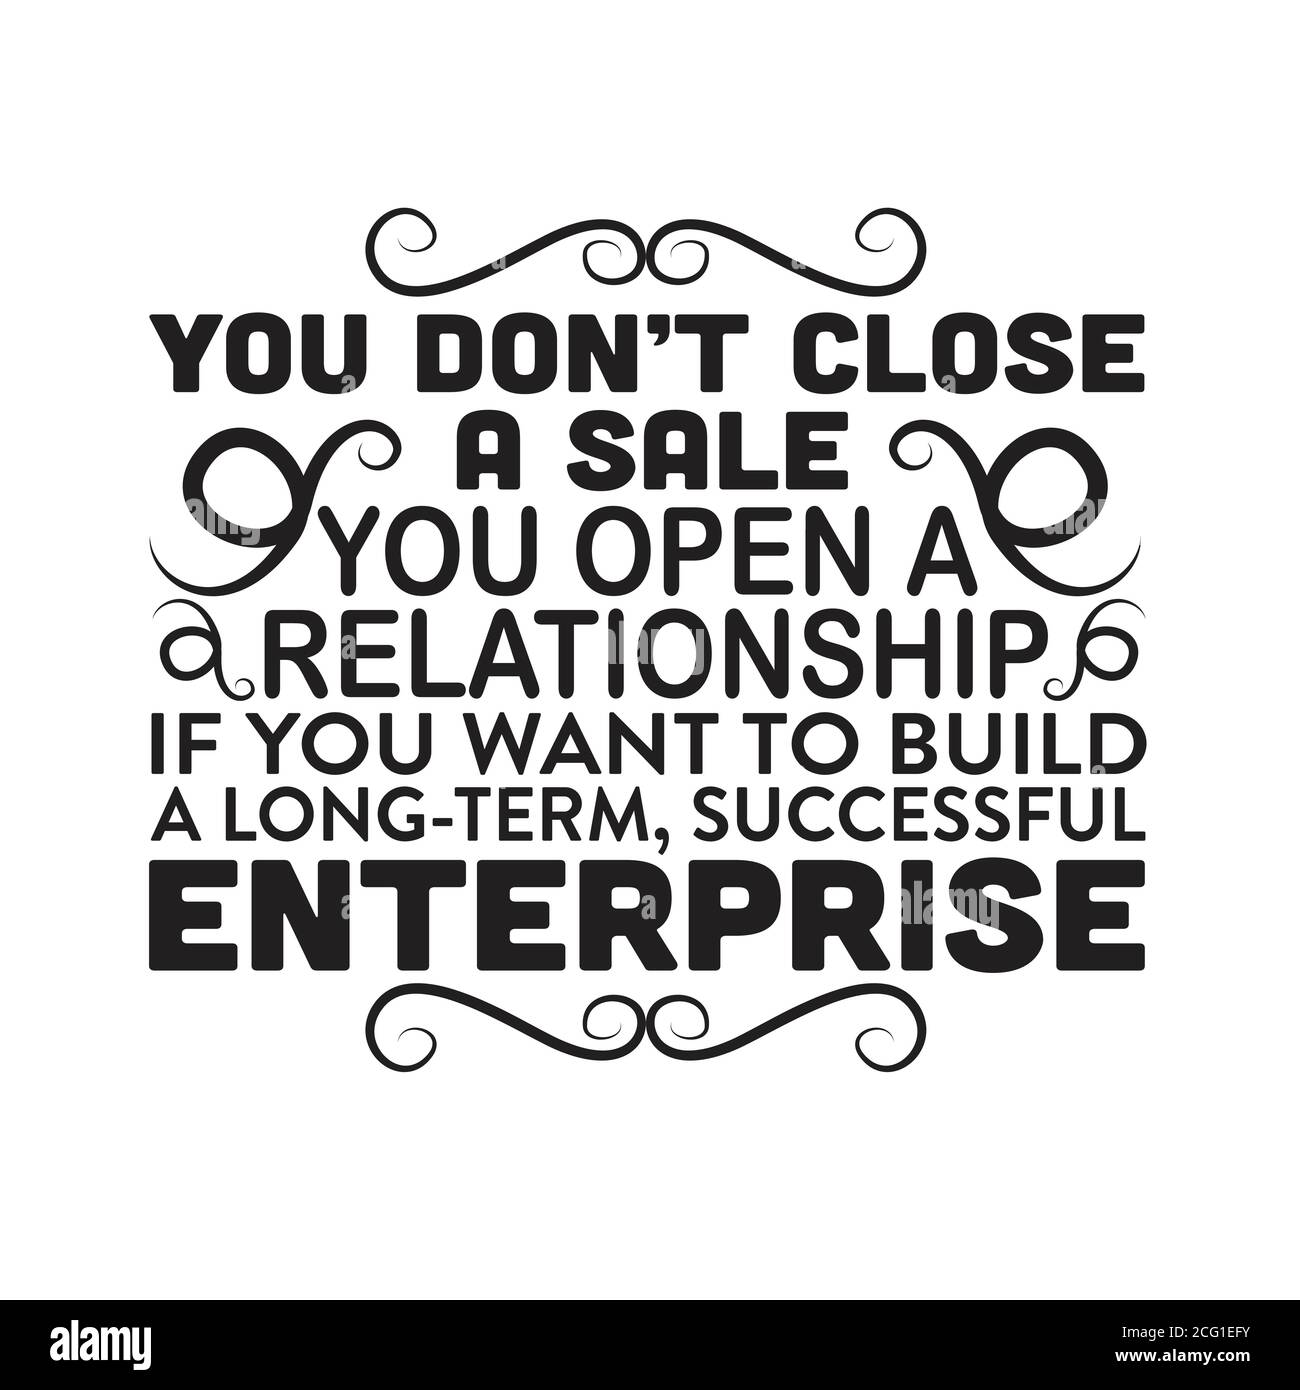 Business Quote good for poster. You don't close a sale you open a relationship. Stock Vector